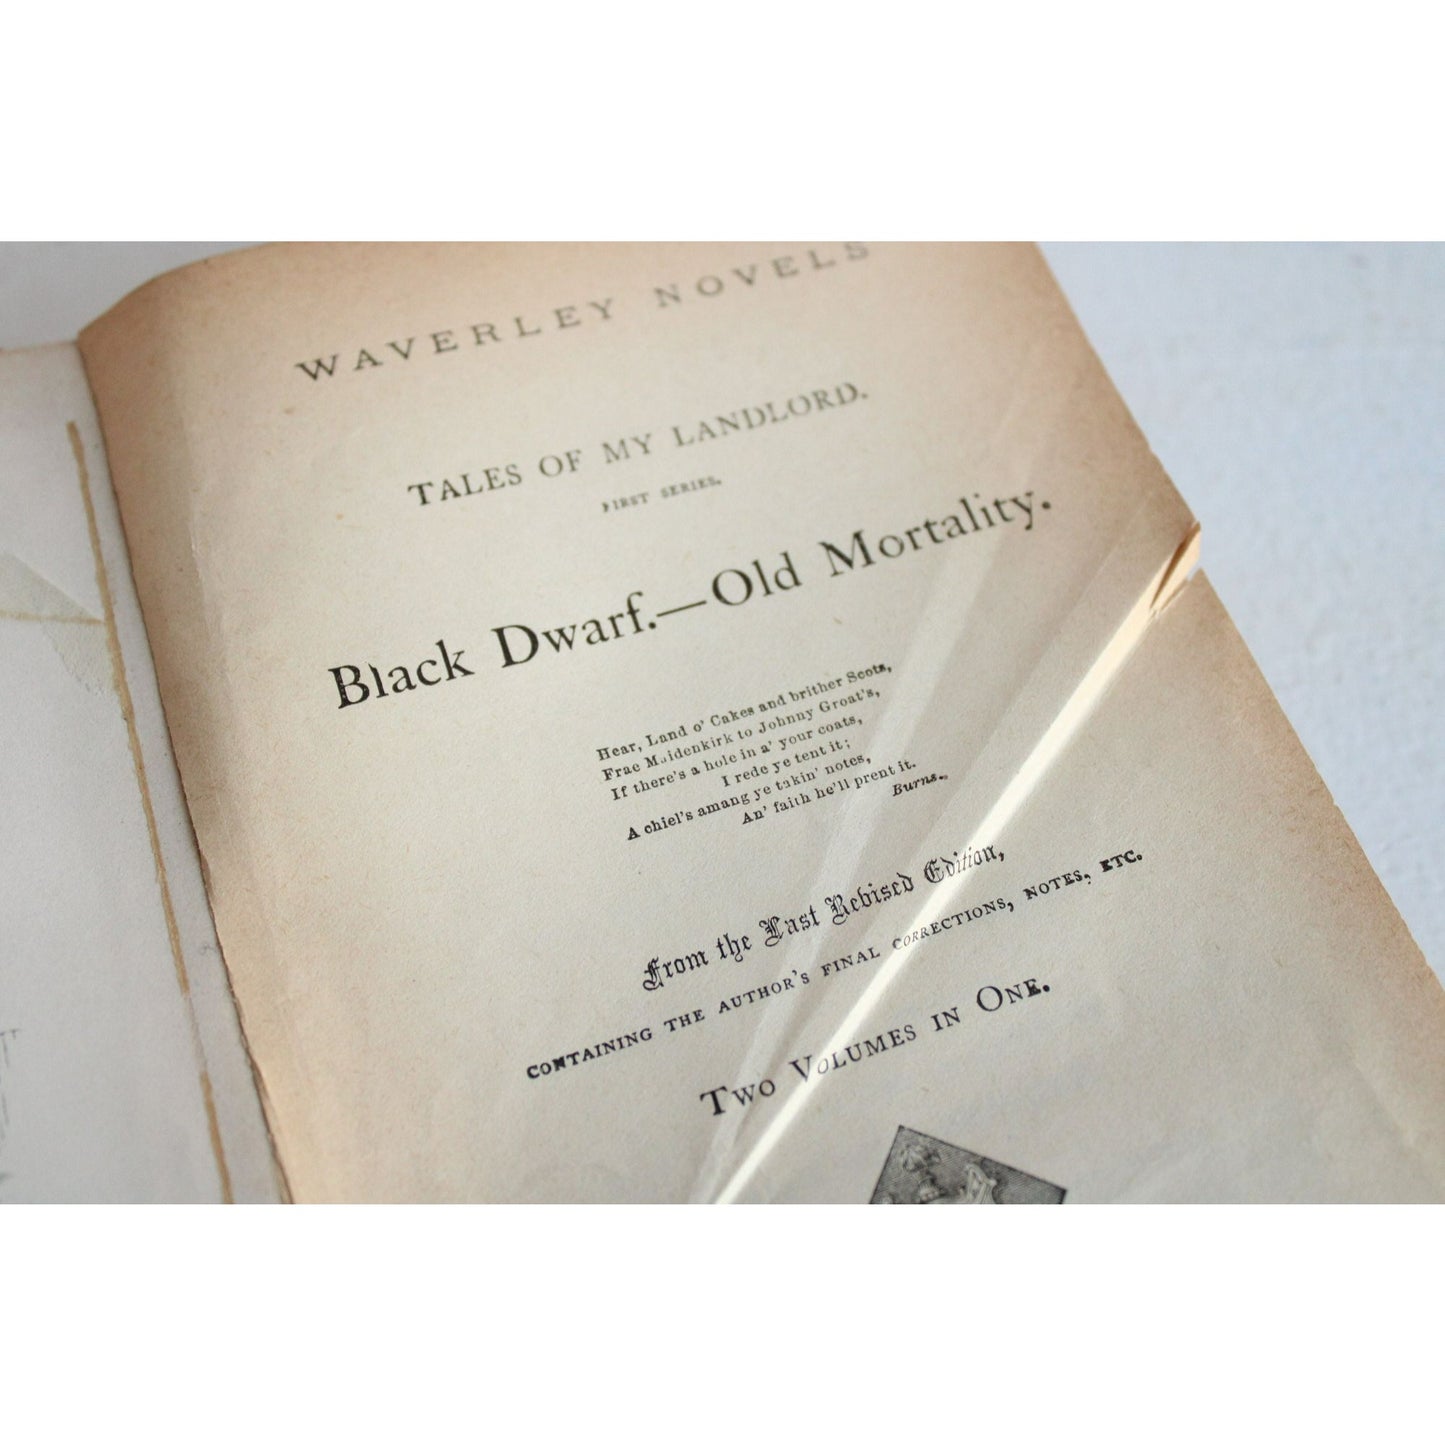 Vintage Antique 1890s Book, "Black Dwarf and Old Mortality" by Sir Walter Scott